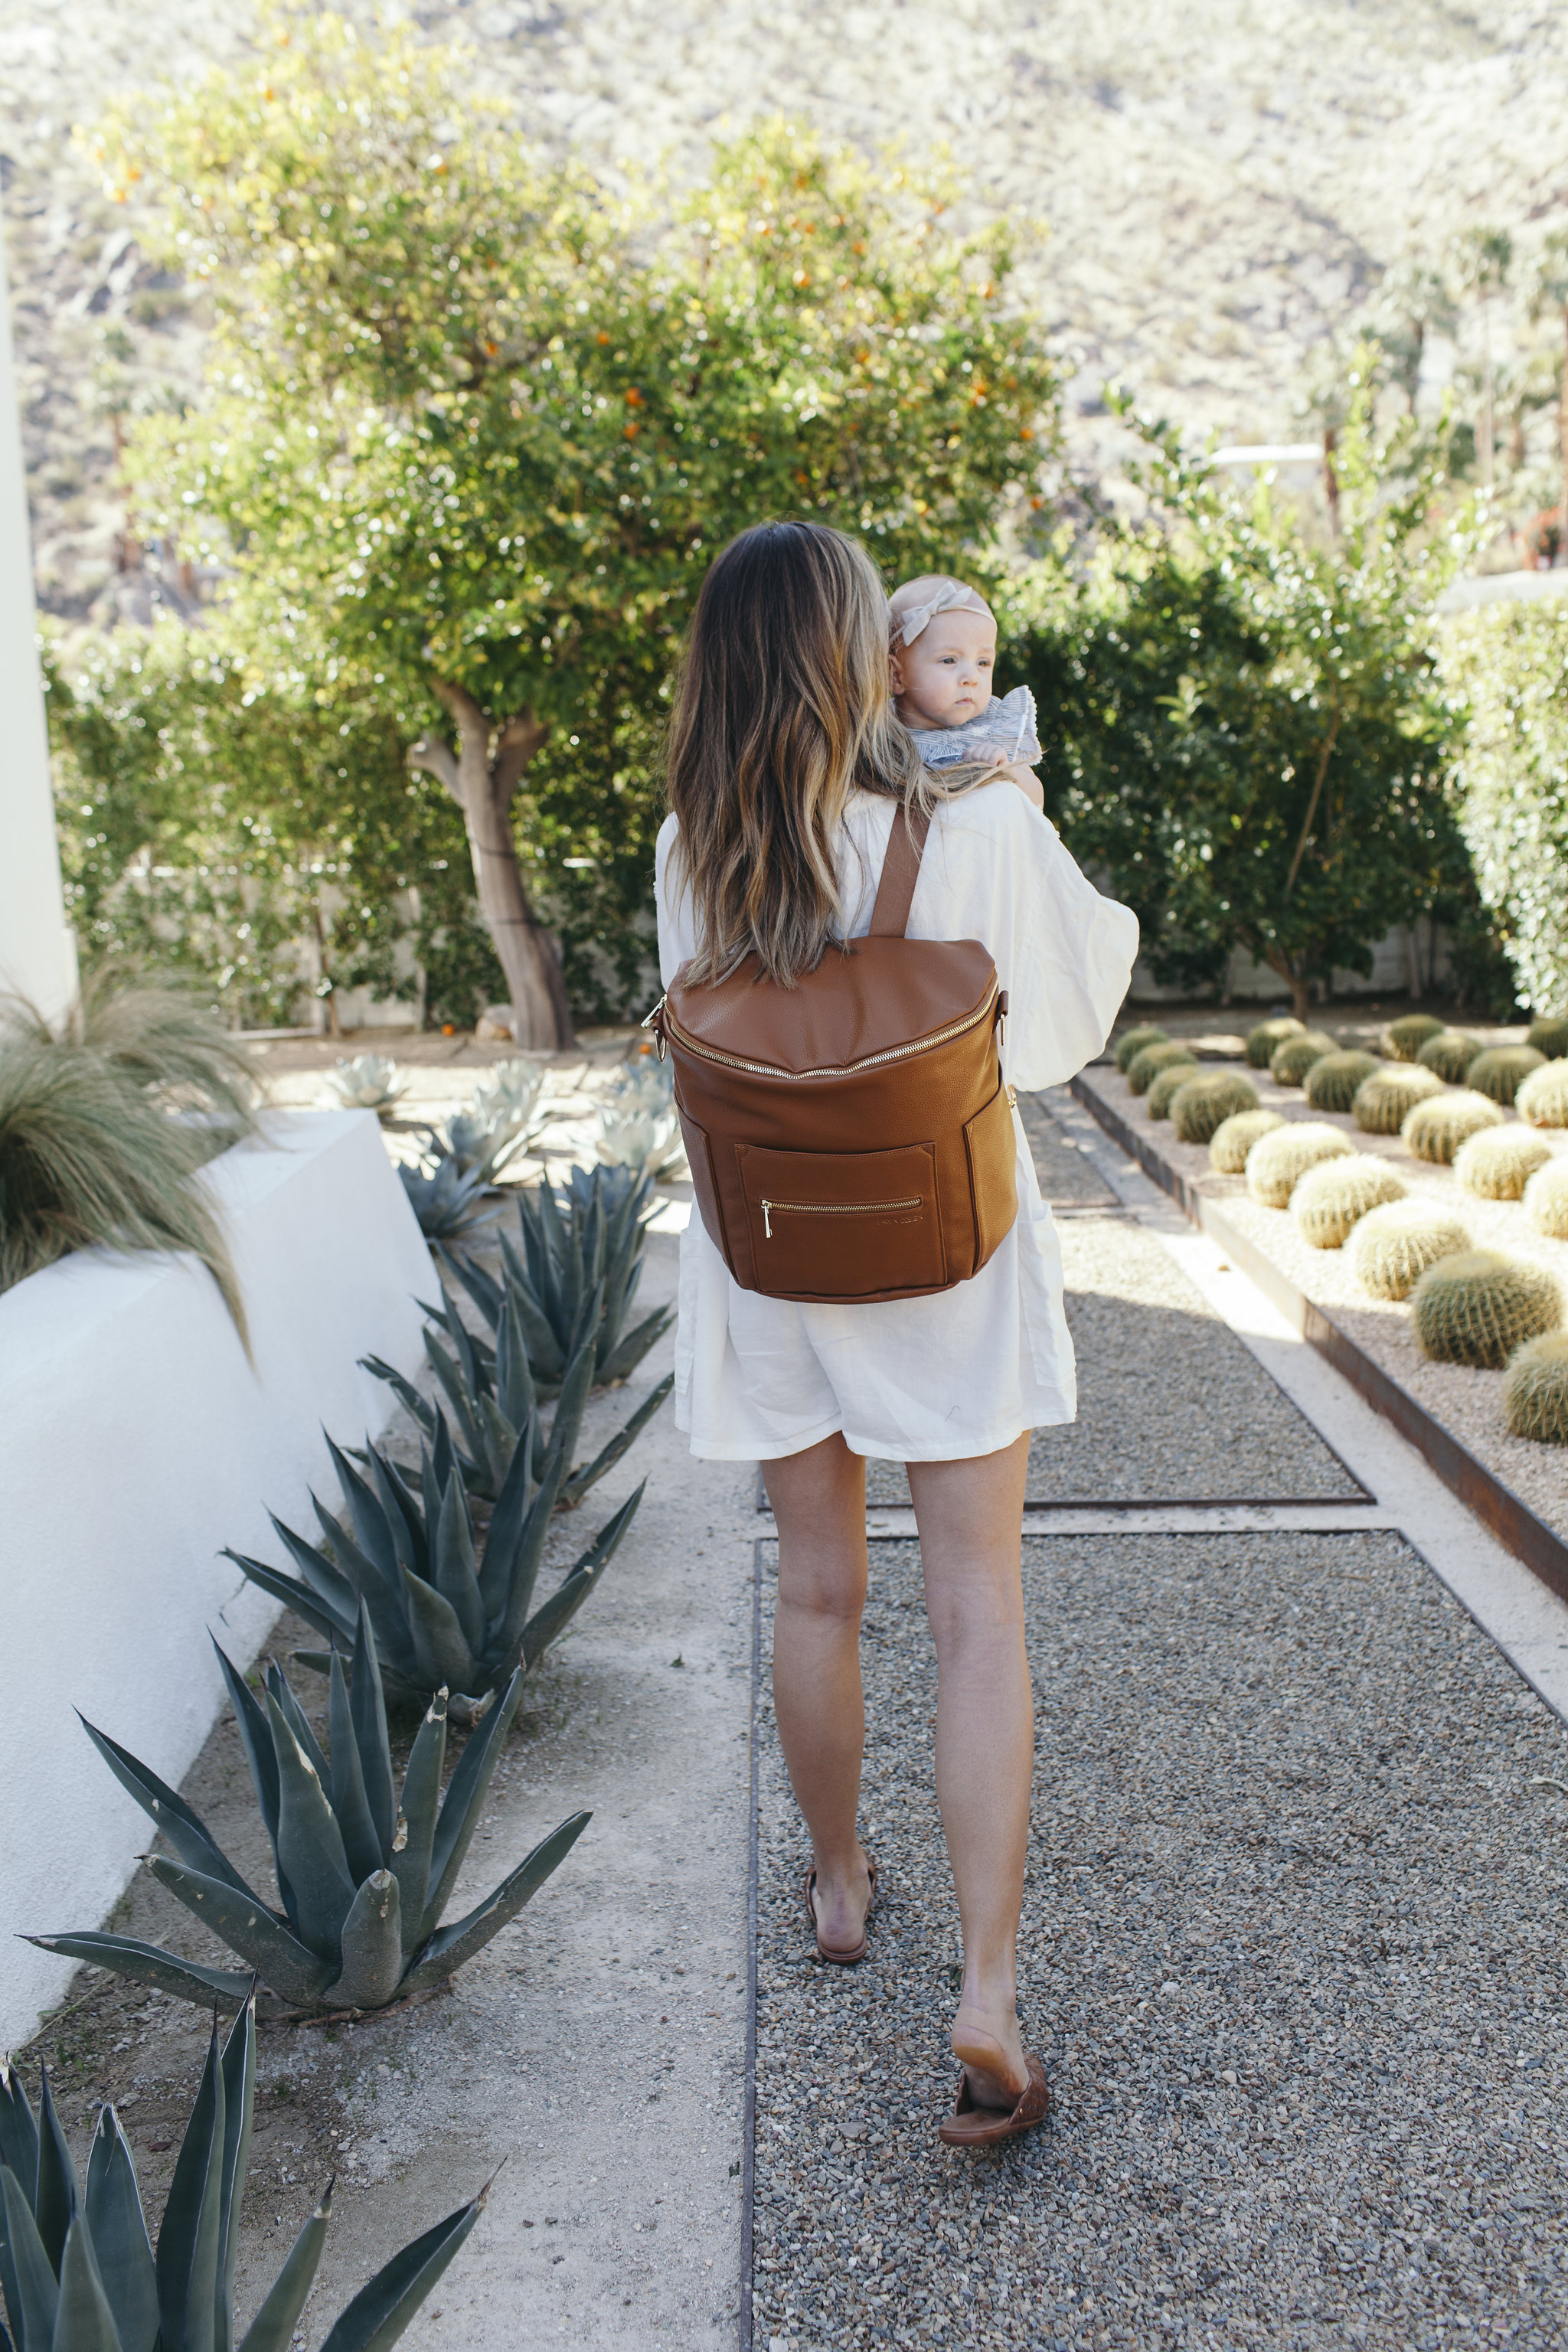 Fawn Diaper Bag Sale - Palms to Pines